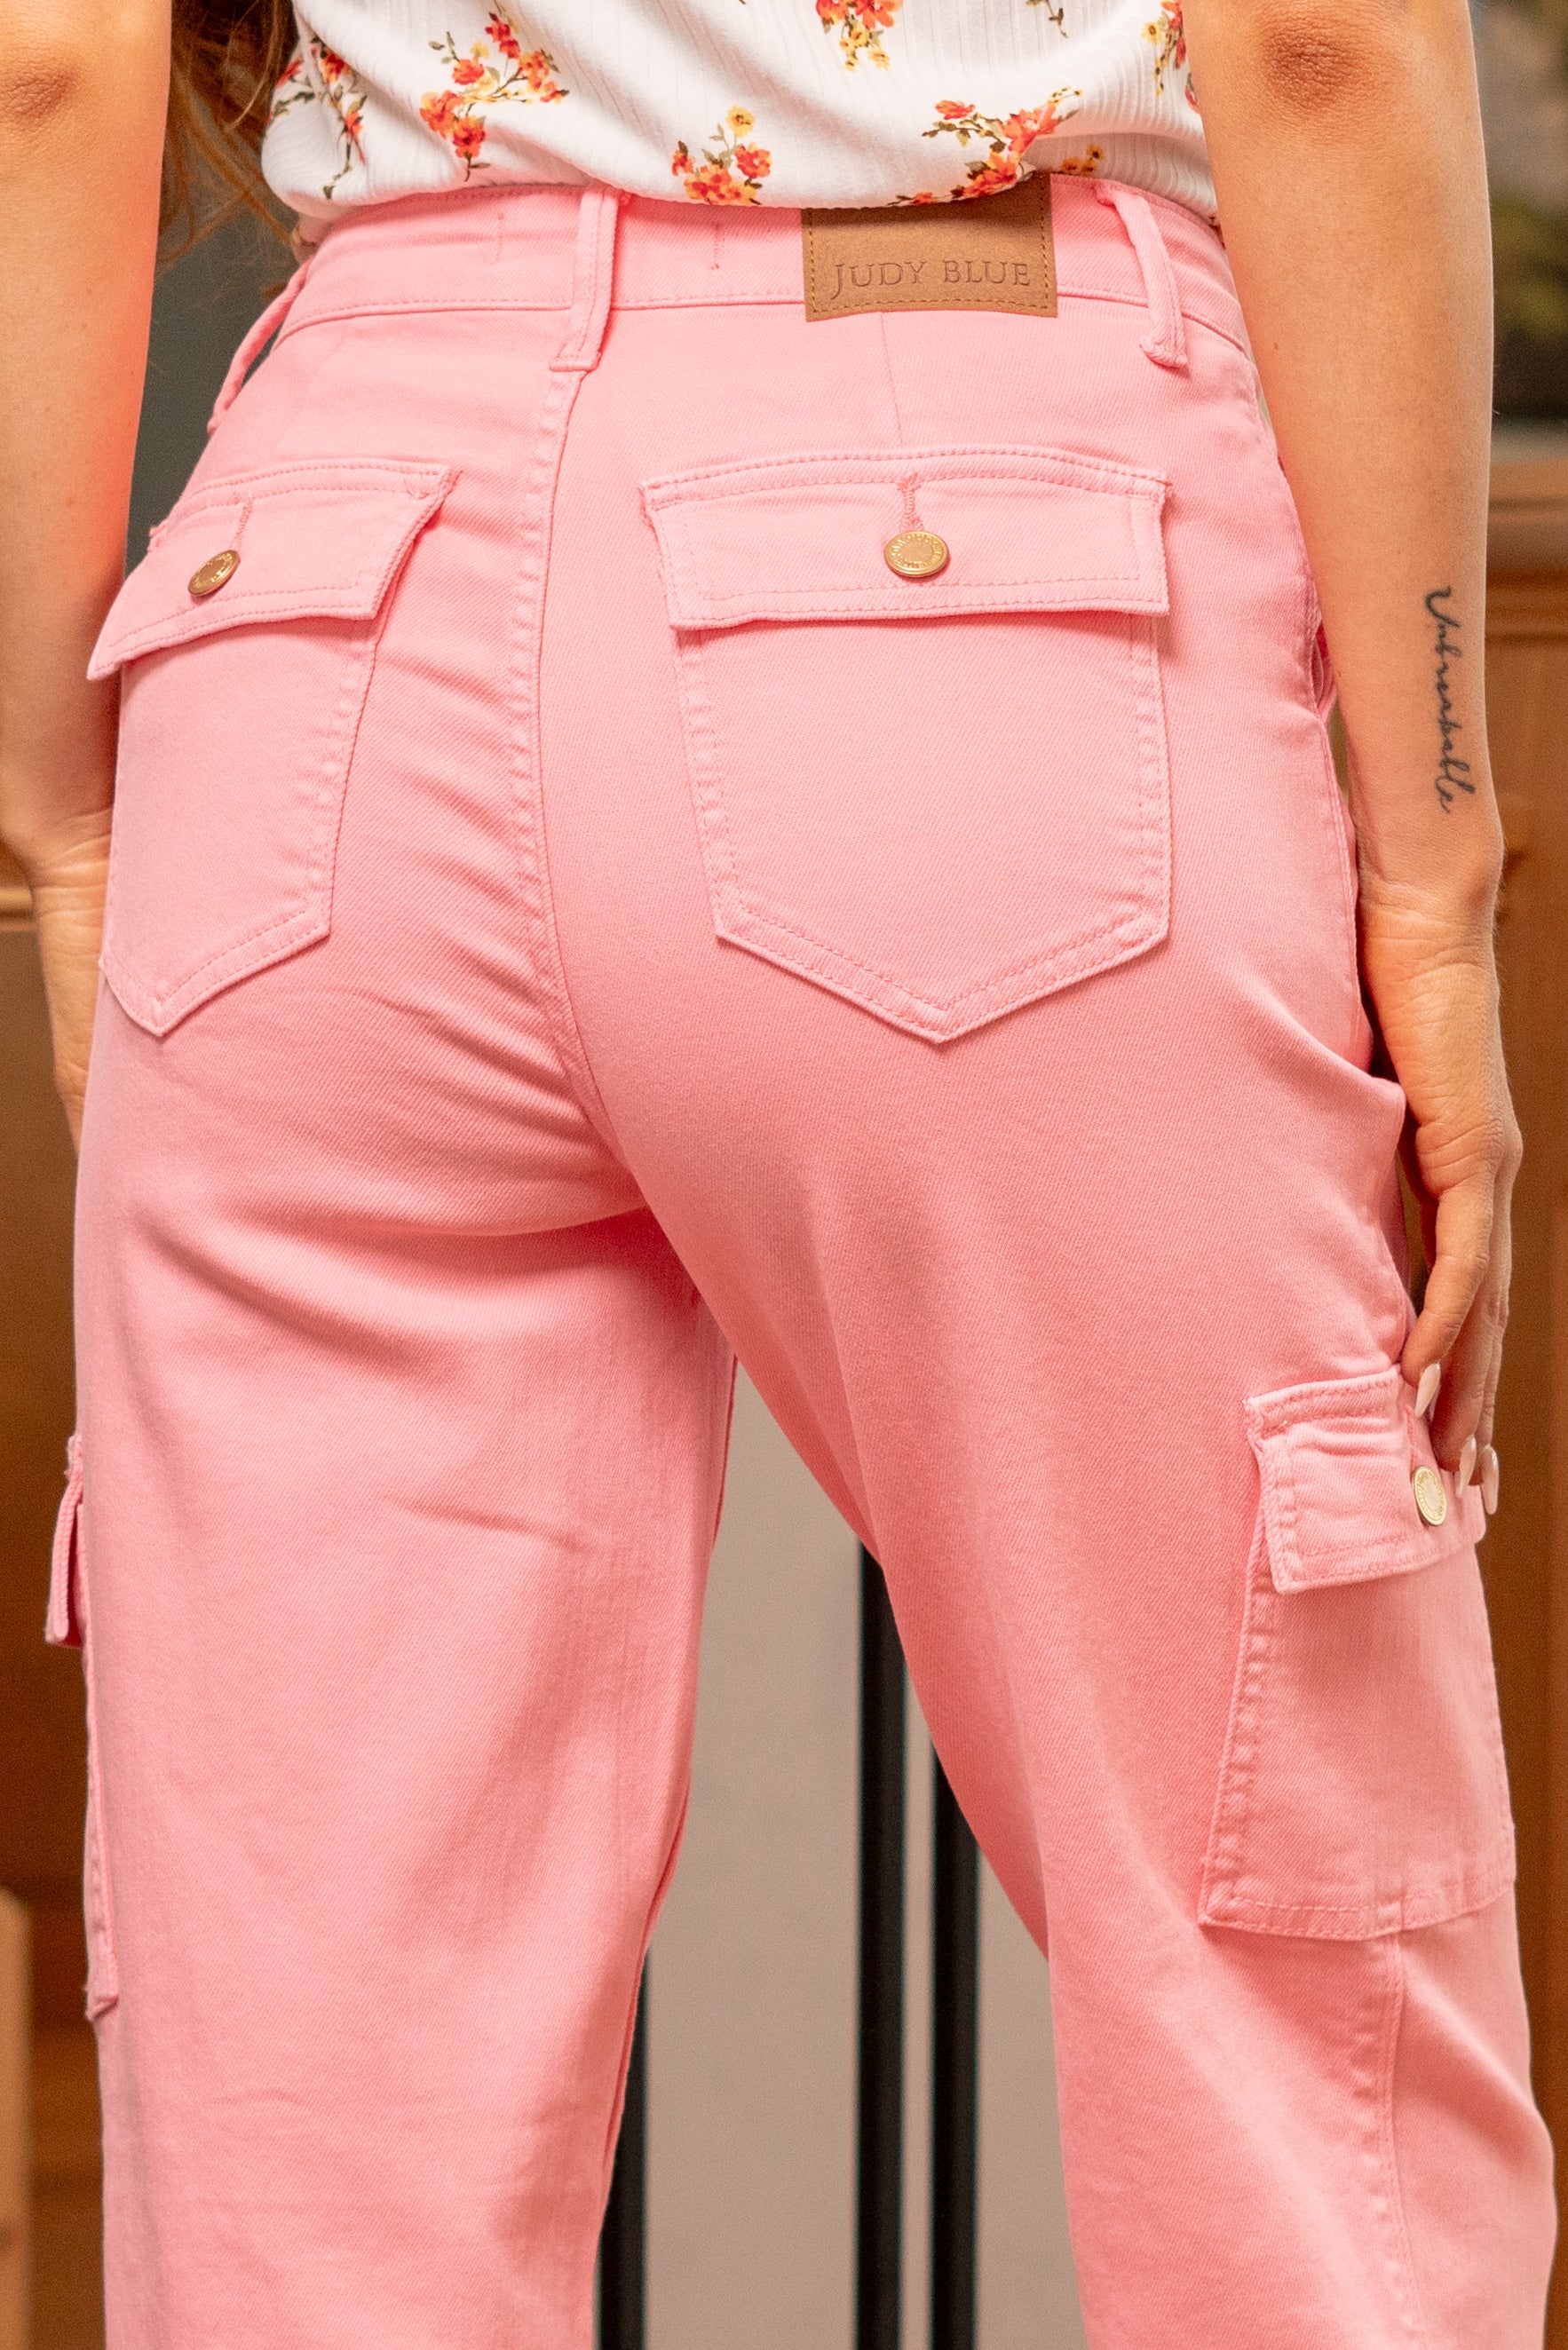 Judy Blue High-Waist Pink Garment Dyed Cargo Straight Jeans - Whiskey Skies